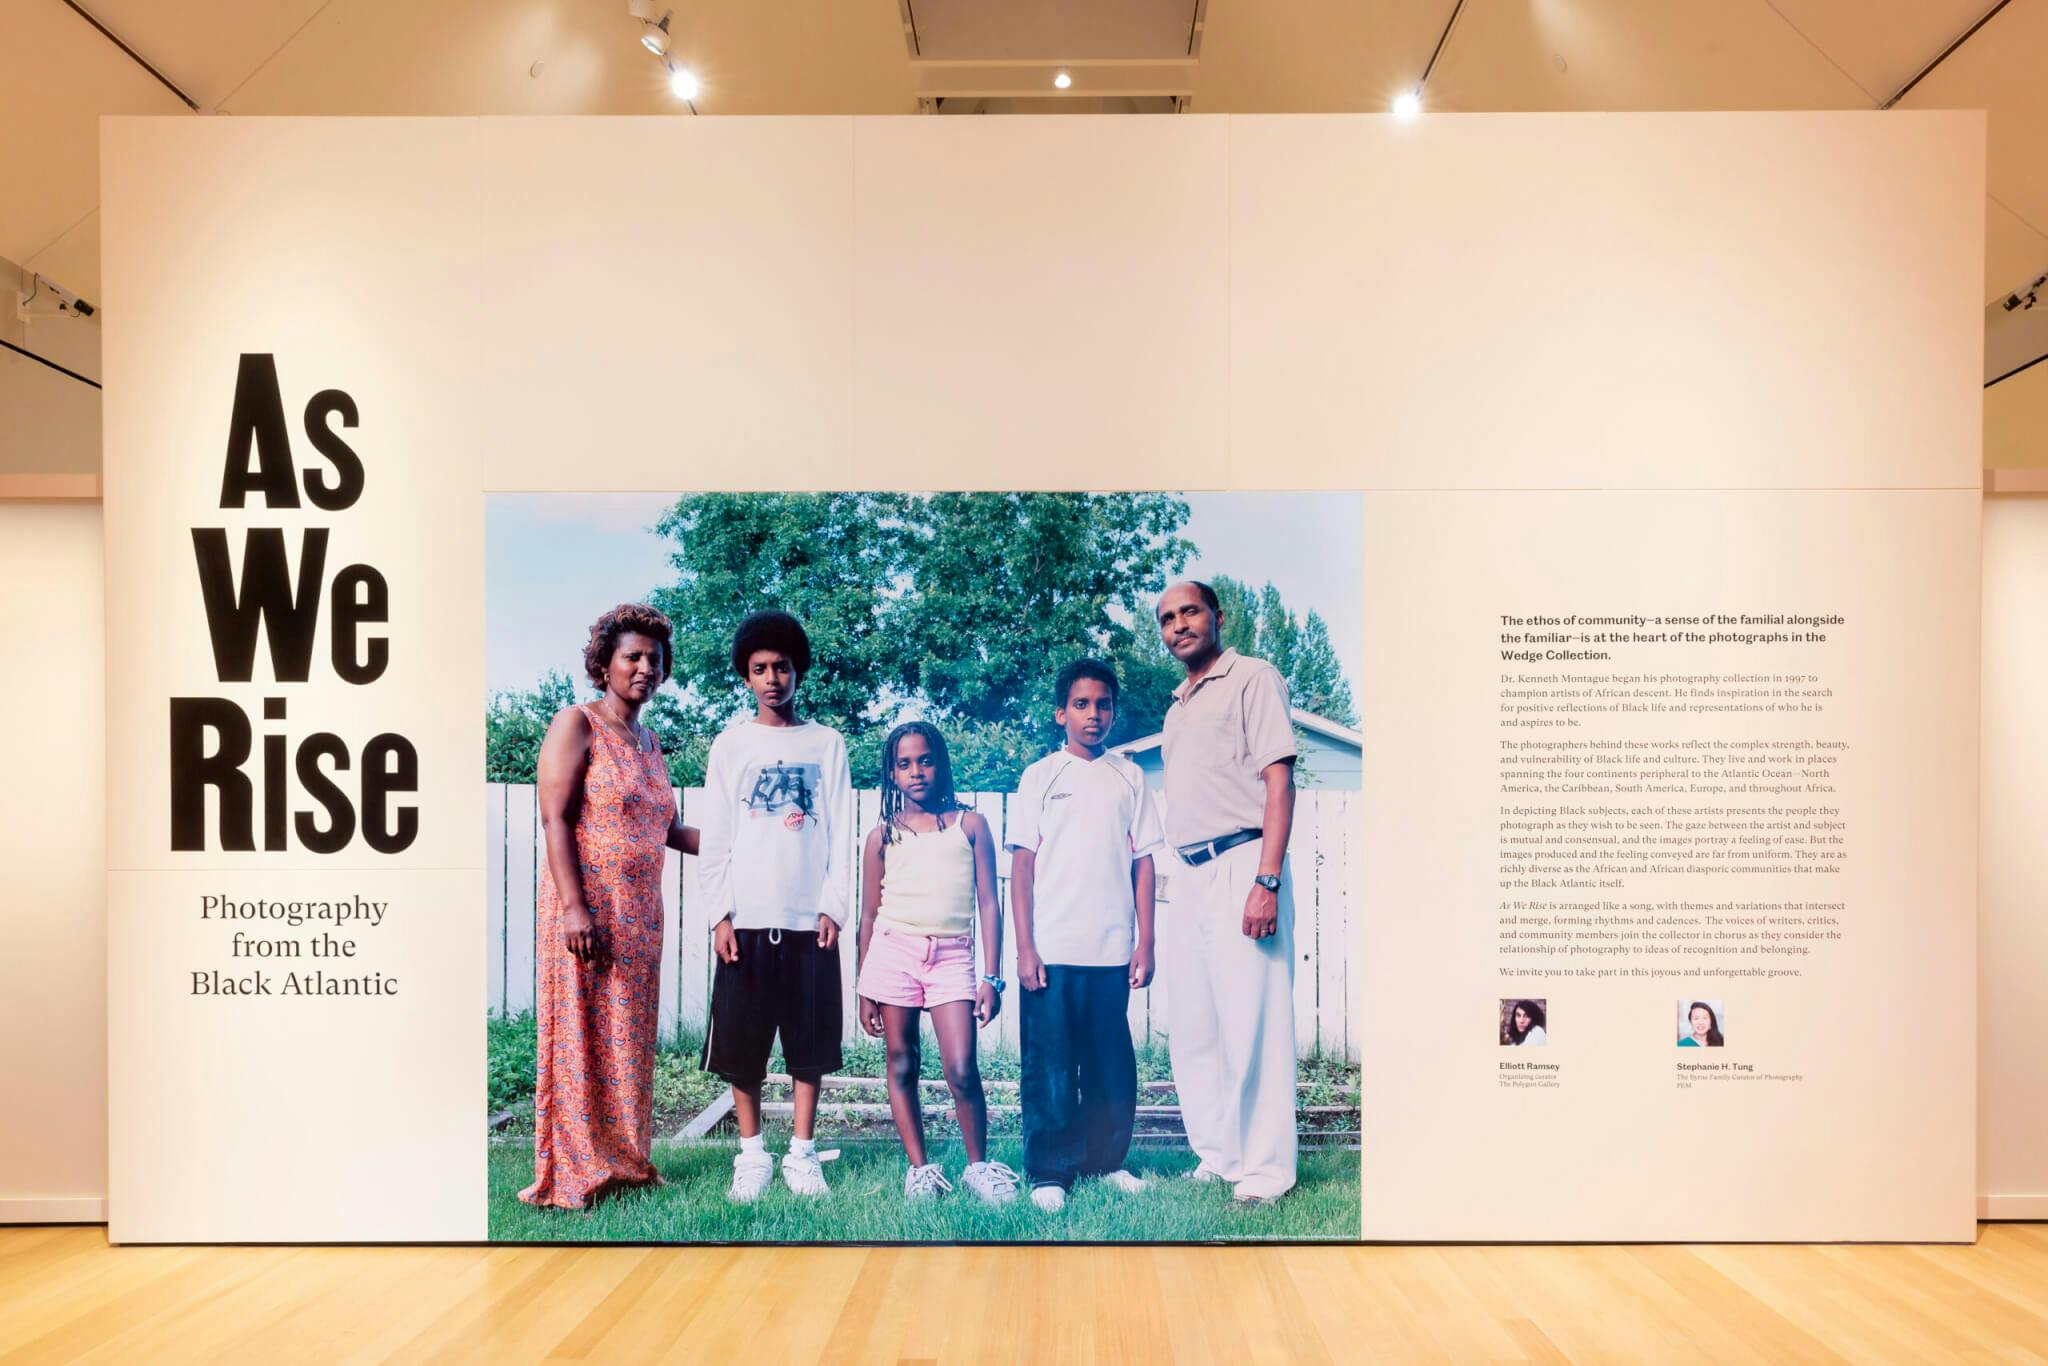 A white wall with "As We Rise" in bold font to the left, an enlarged photograph of five members of a Black family in the middle, and a description of the exhibition on the right.